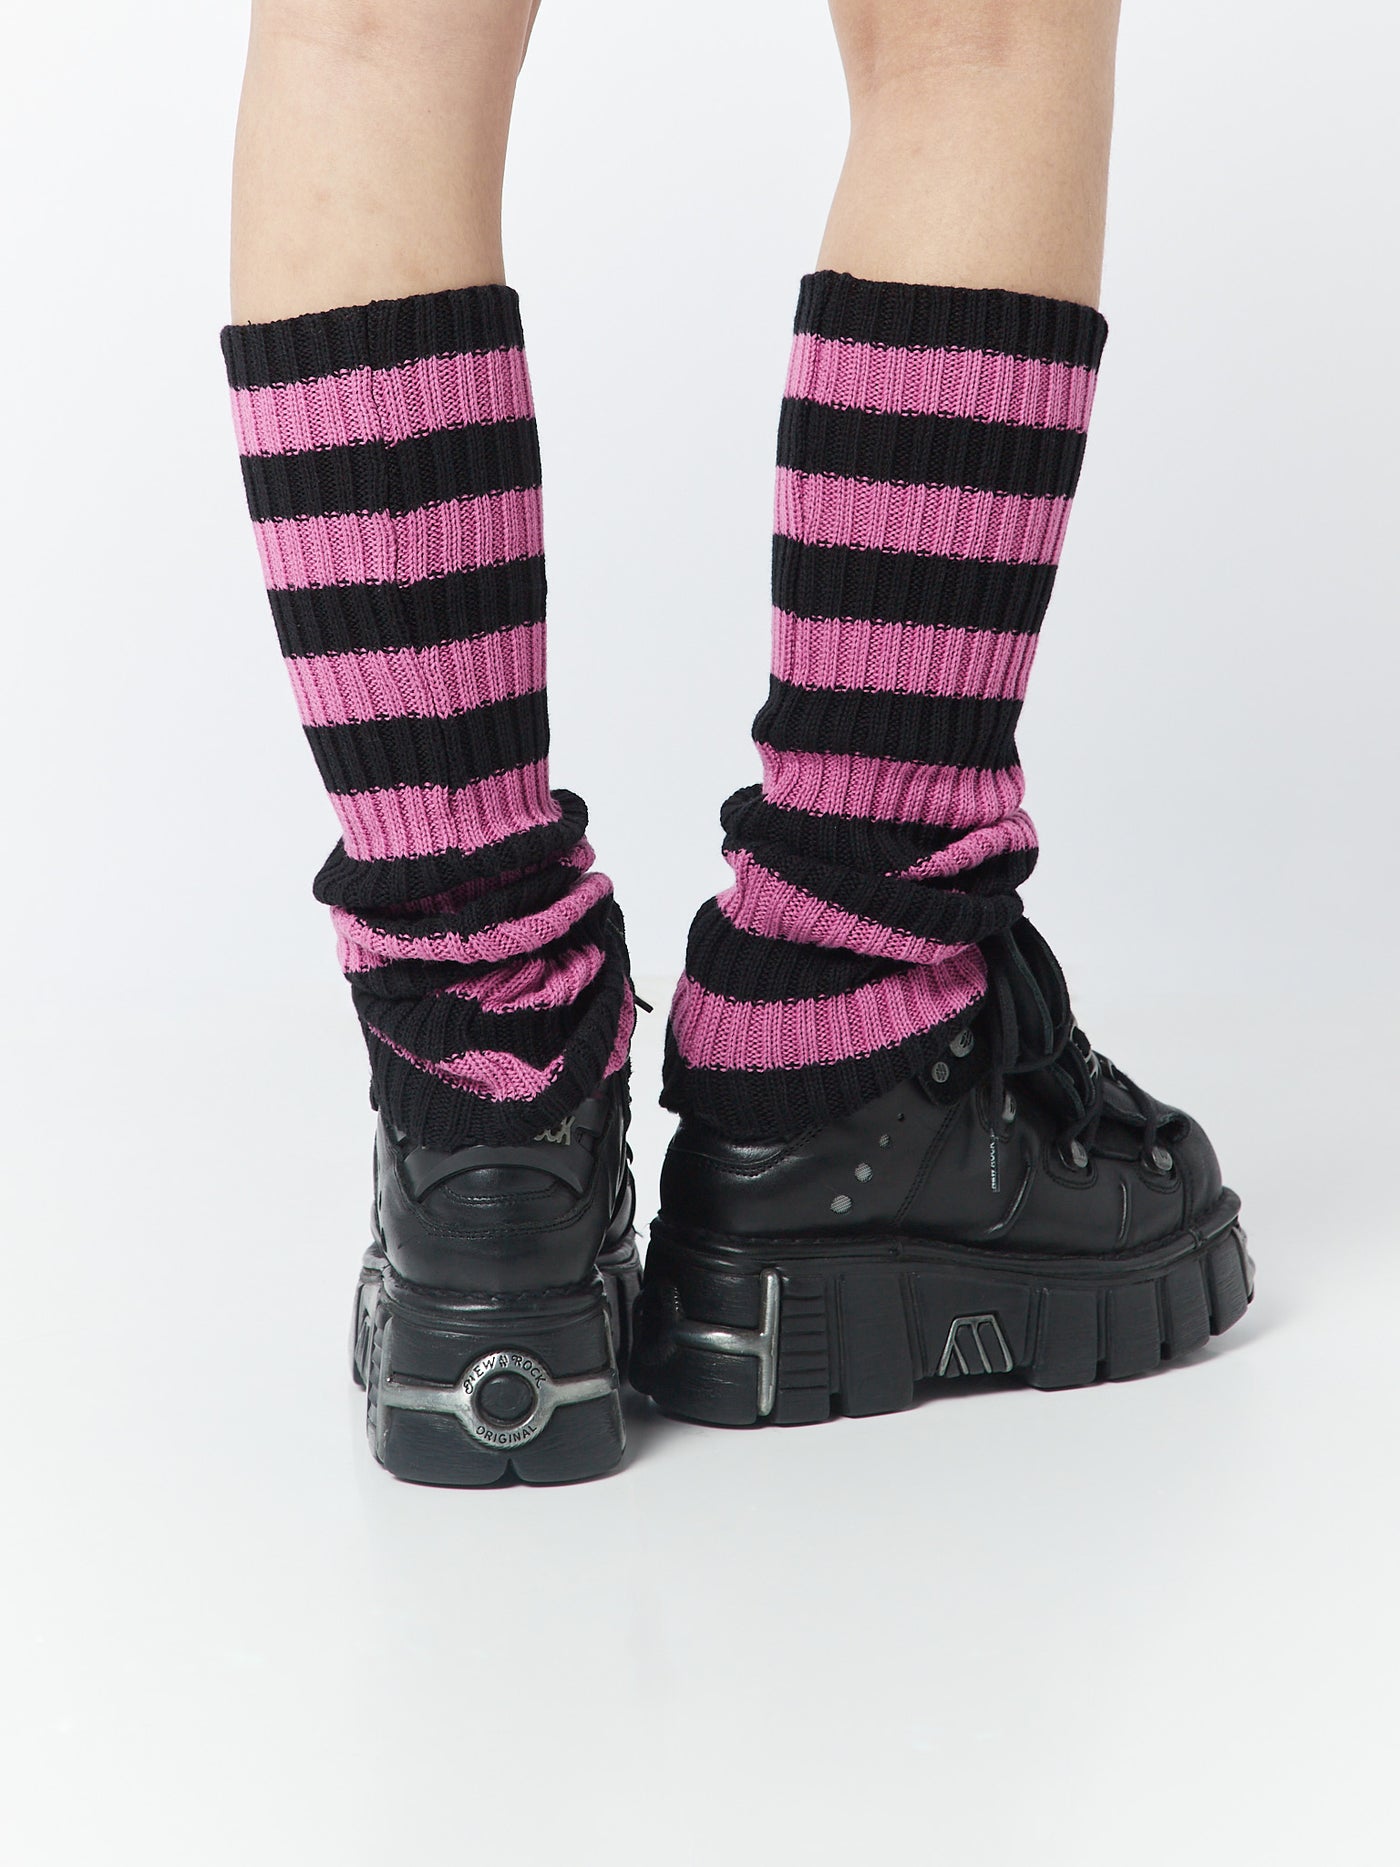 Pink and black striped leg warmers by Minga London, adding a vibrant and stylish pop of color to your outfit while keeping your legs warm and cozy.